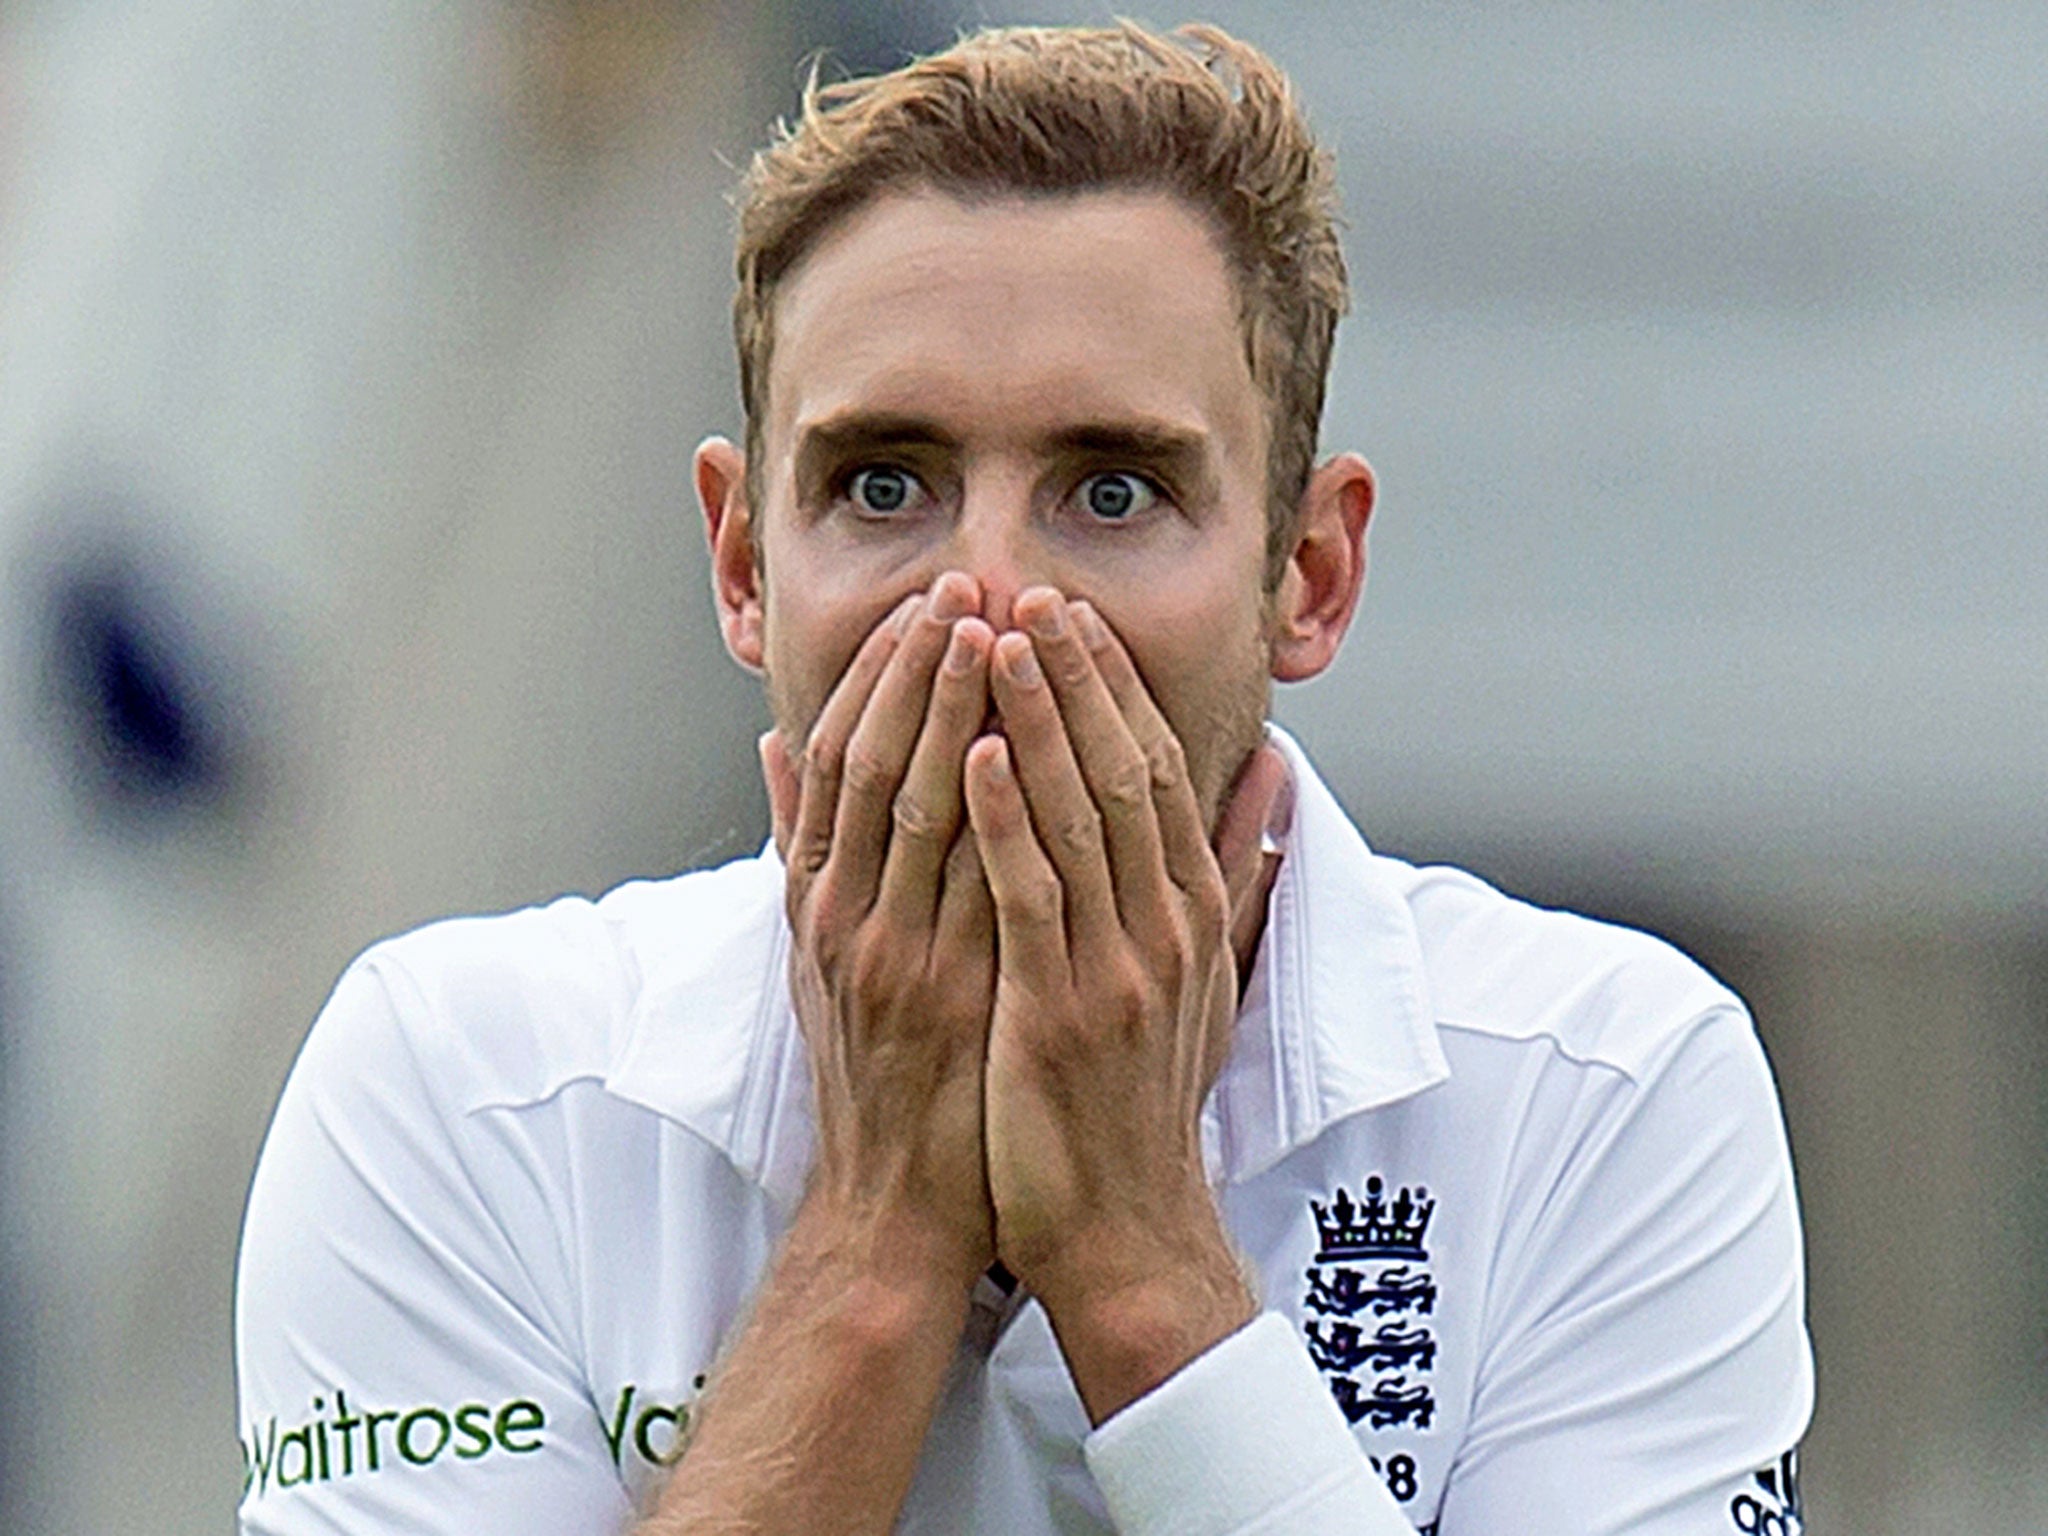 Stuart Broad was shocked by Ben Stokes' catch